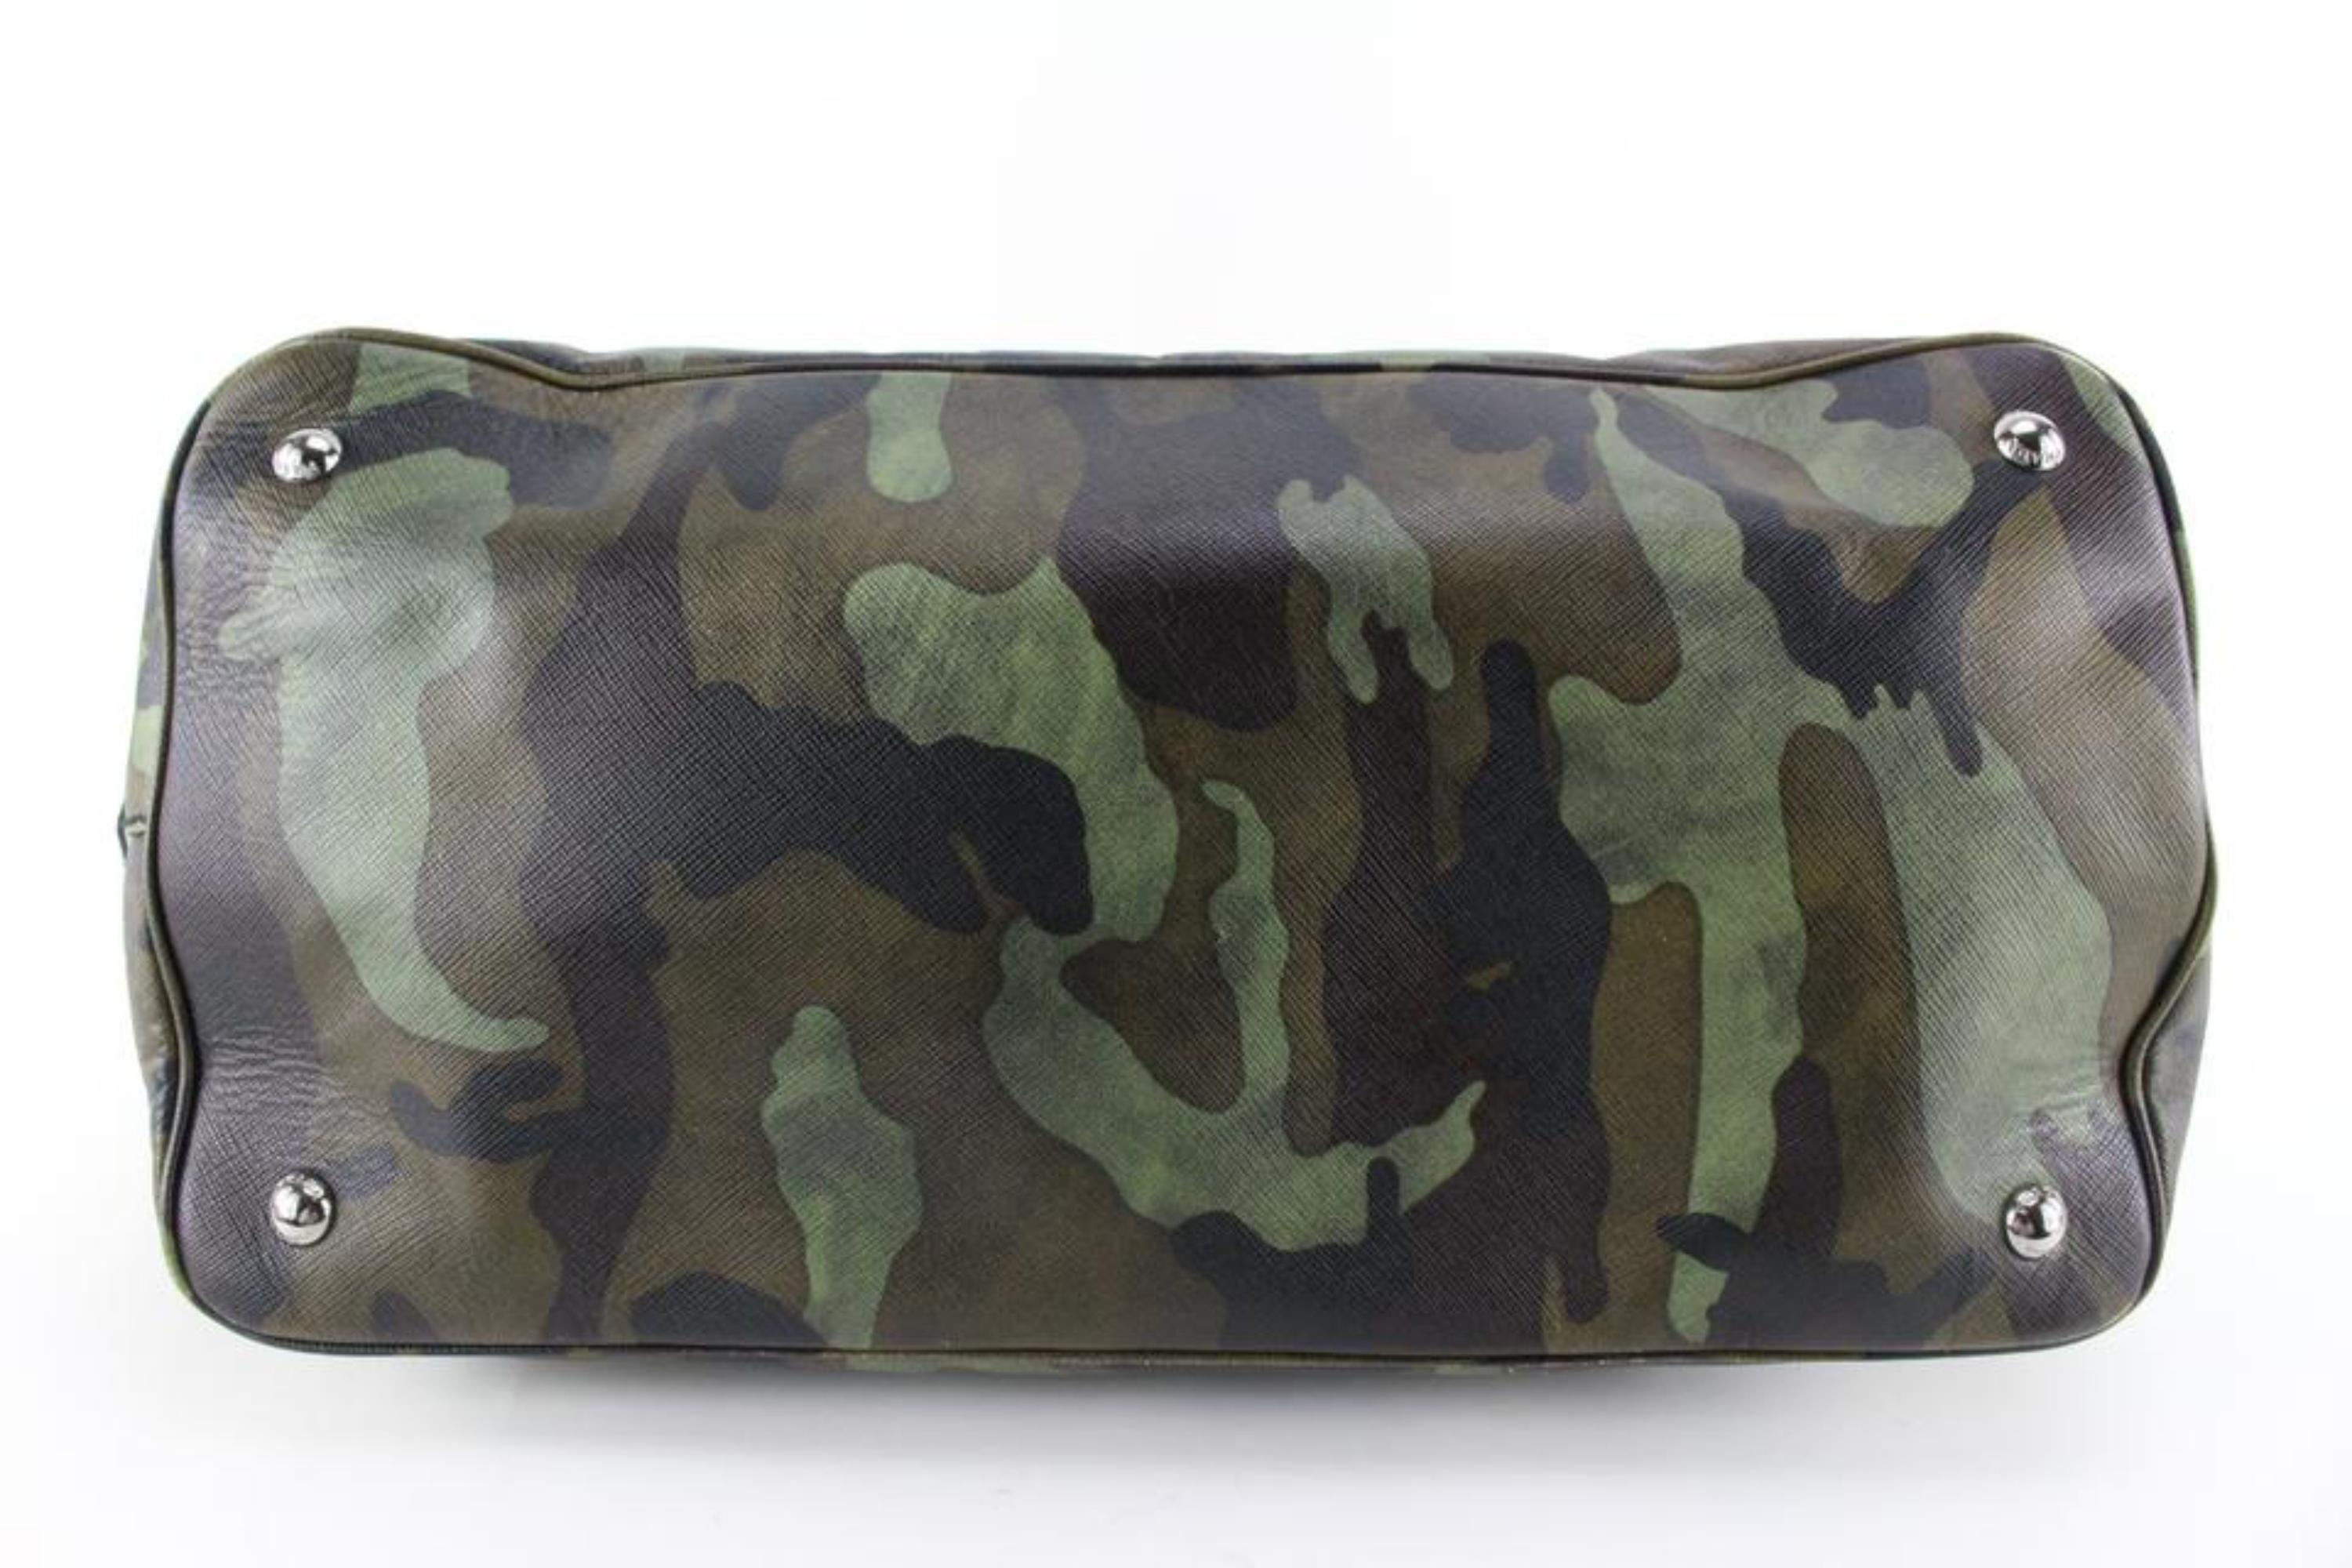 Prada Camouflage Saffiano Leather Mimetico 2way Bag 12p630s In Good Condition For Sale In Dix hills, NY